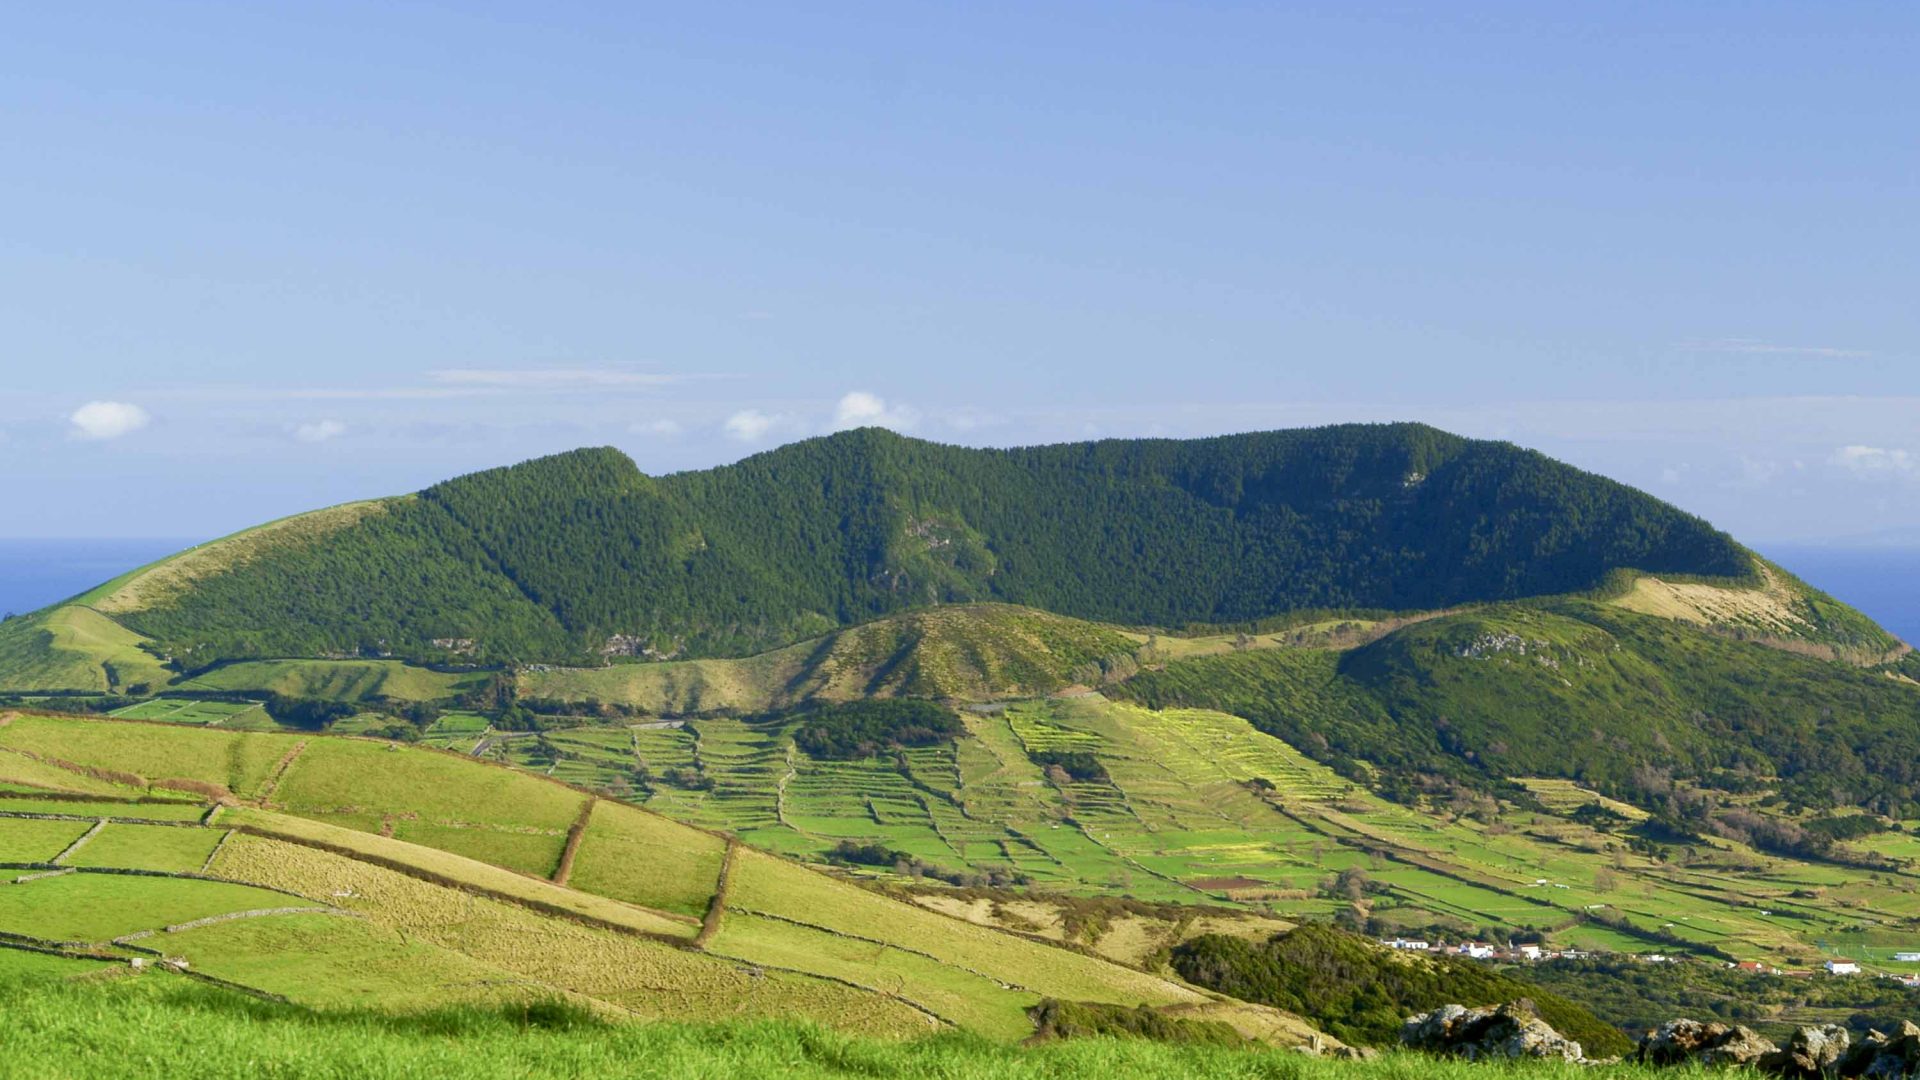 A green mountain surrounded by green fields.